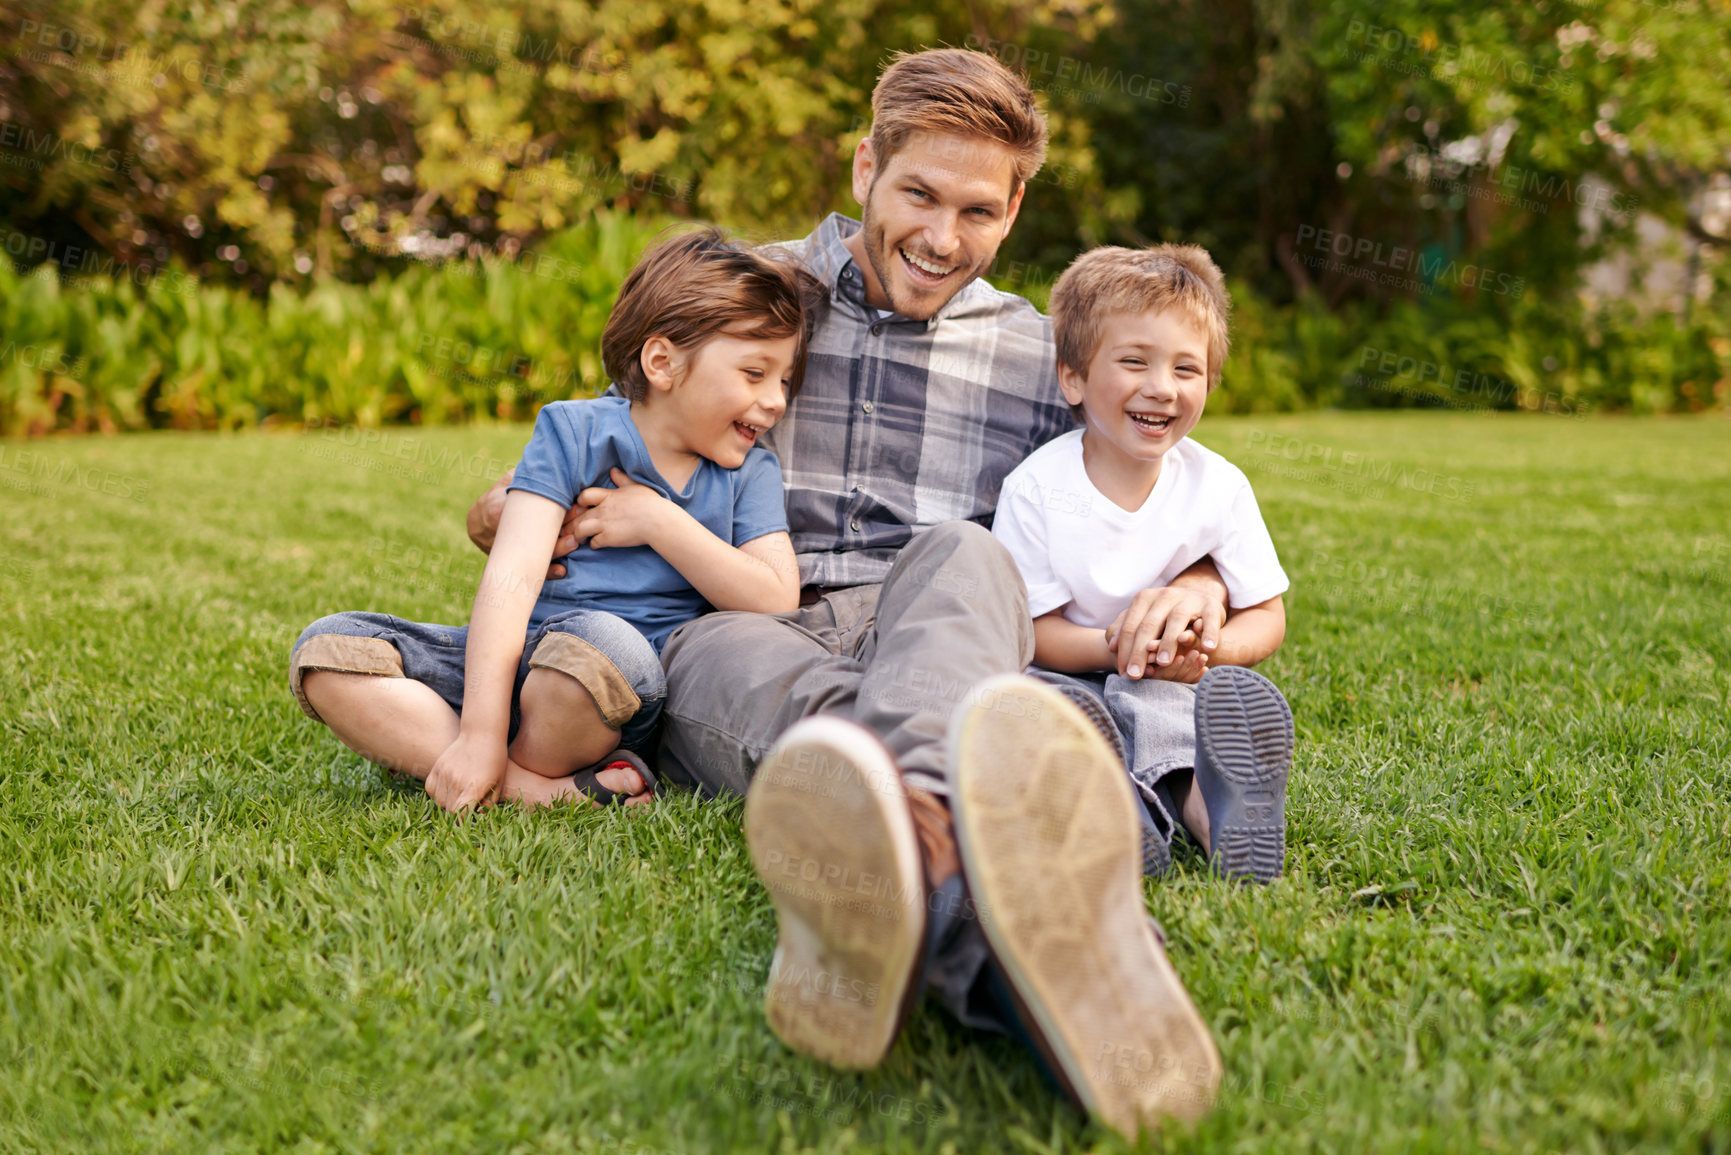 Buy stock photo Smile, nature and portrait of kids with father relaxing on grass in outdoor park or garden. Happy, family and excited boy children sitting on lawn with young dad for bonding in field together.